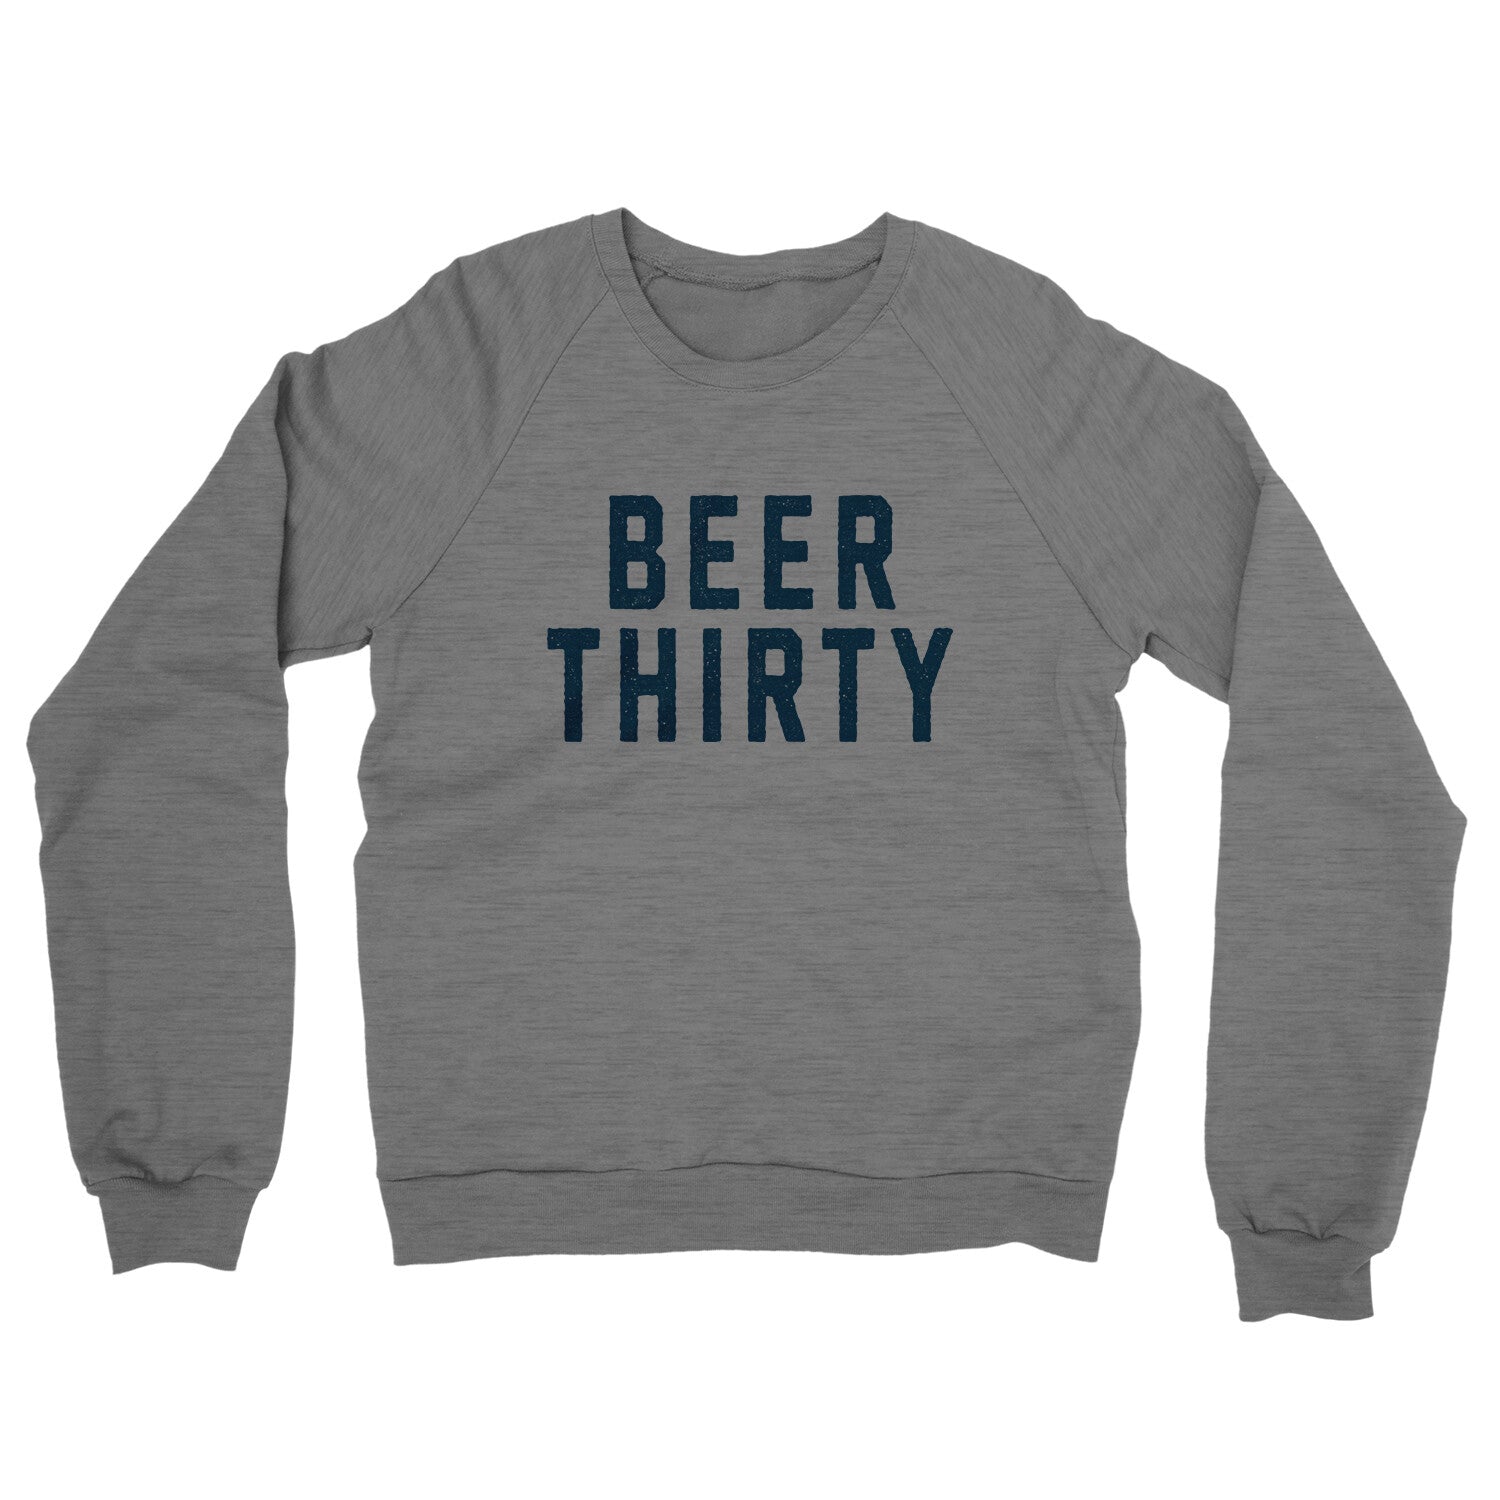 Beer Thirty in Graphite Heather Color